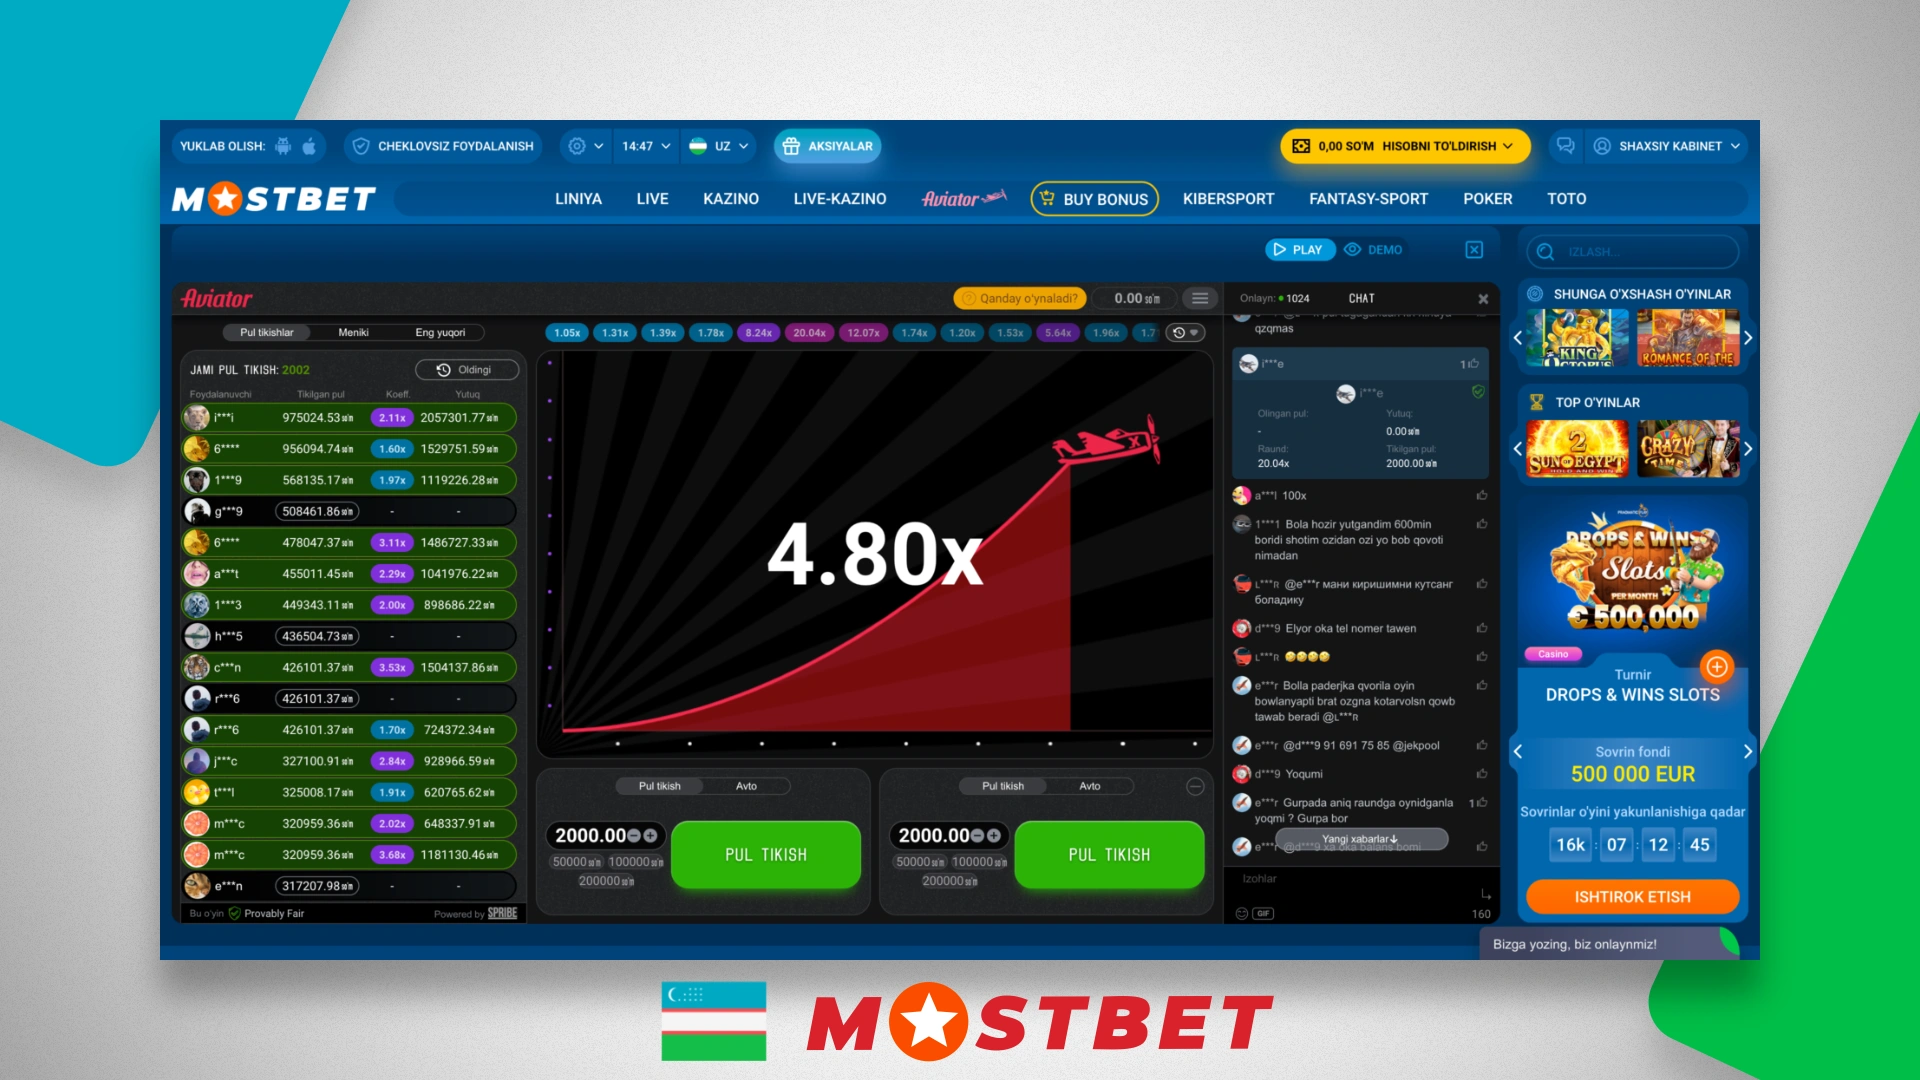 The popular game Aviator is available to Mostbet users from Uzbekistan